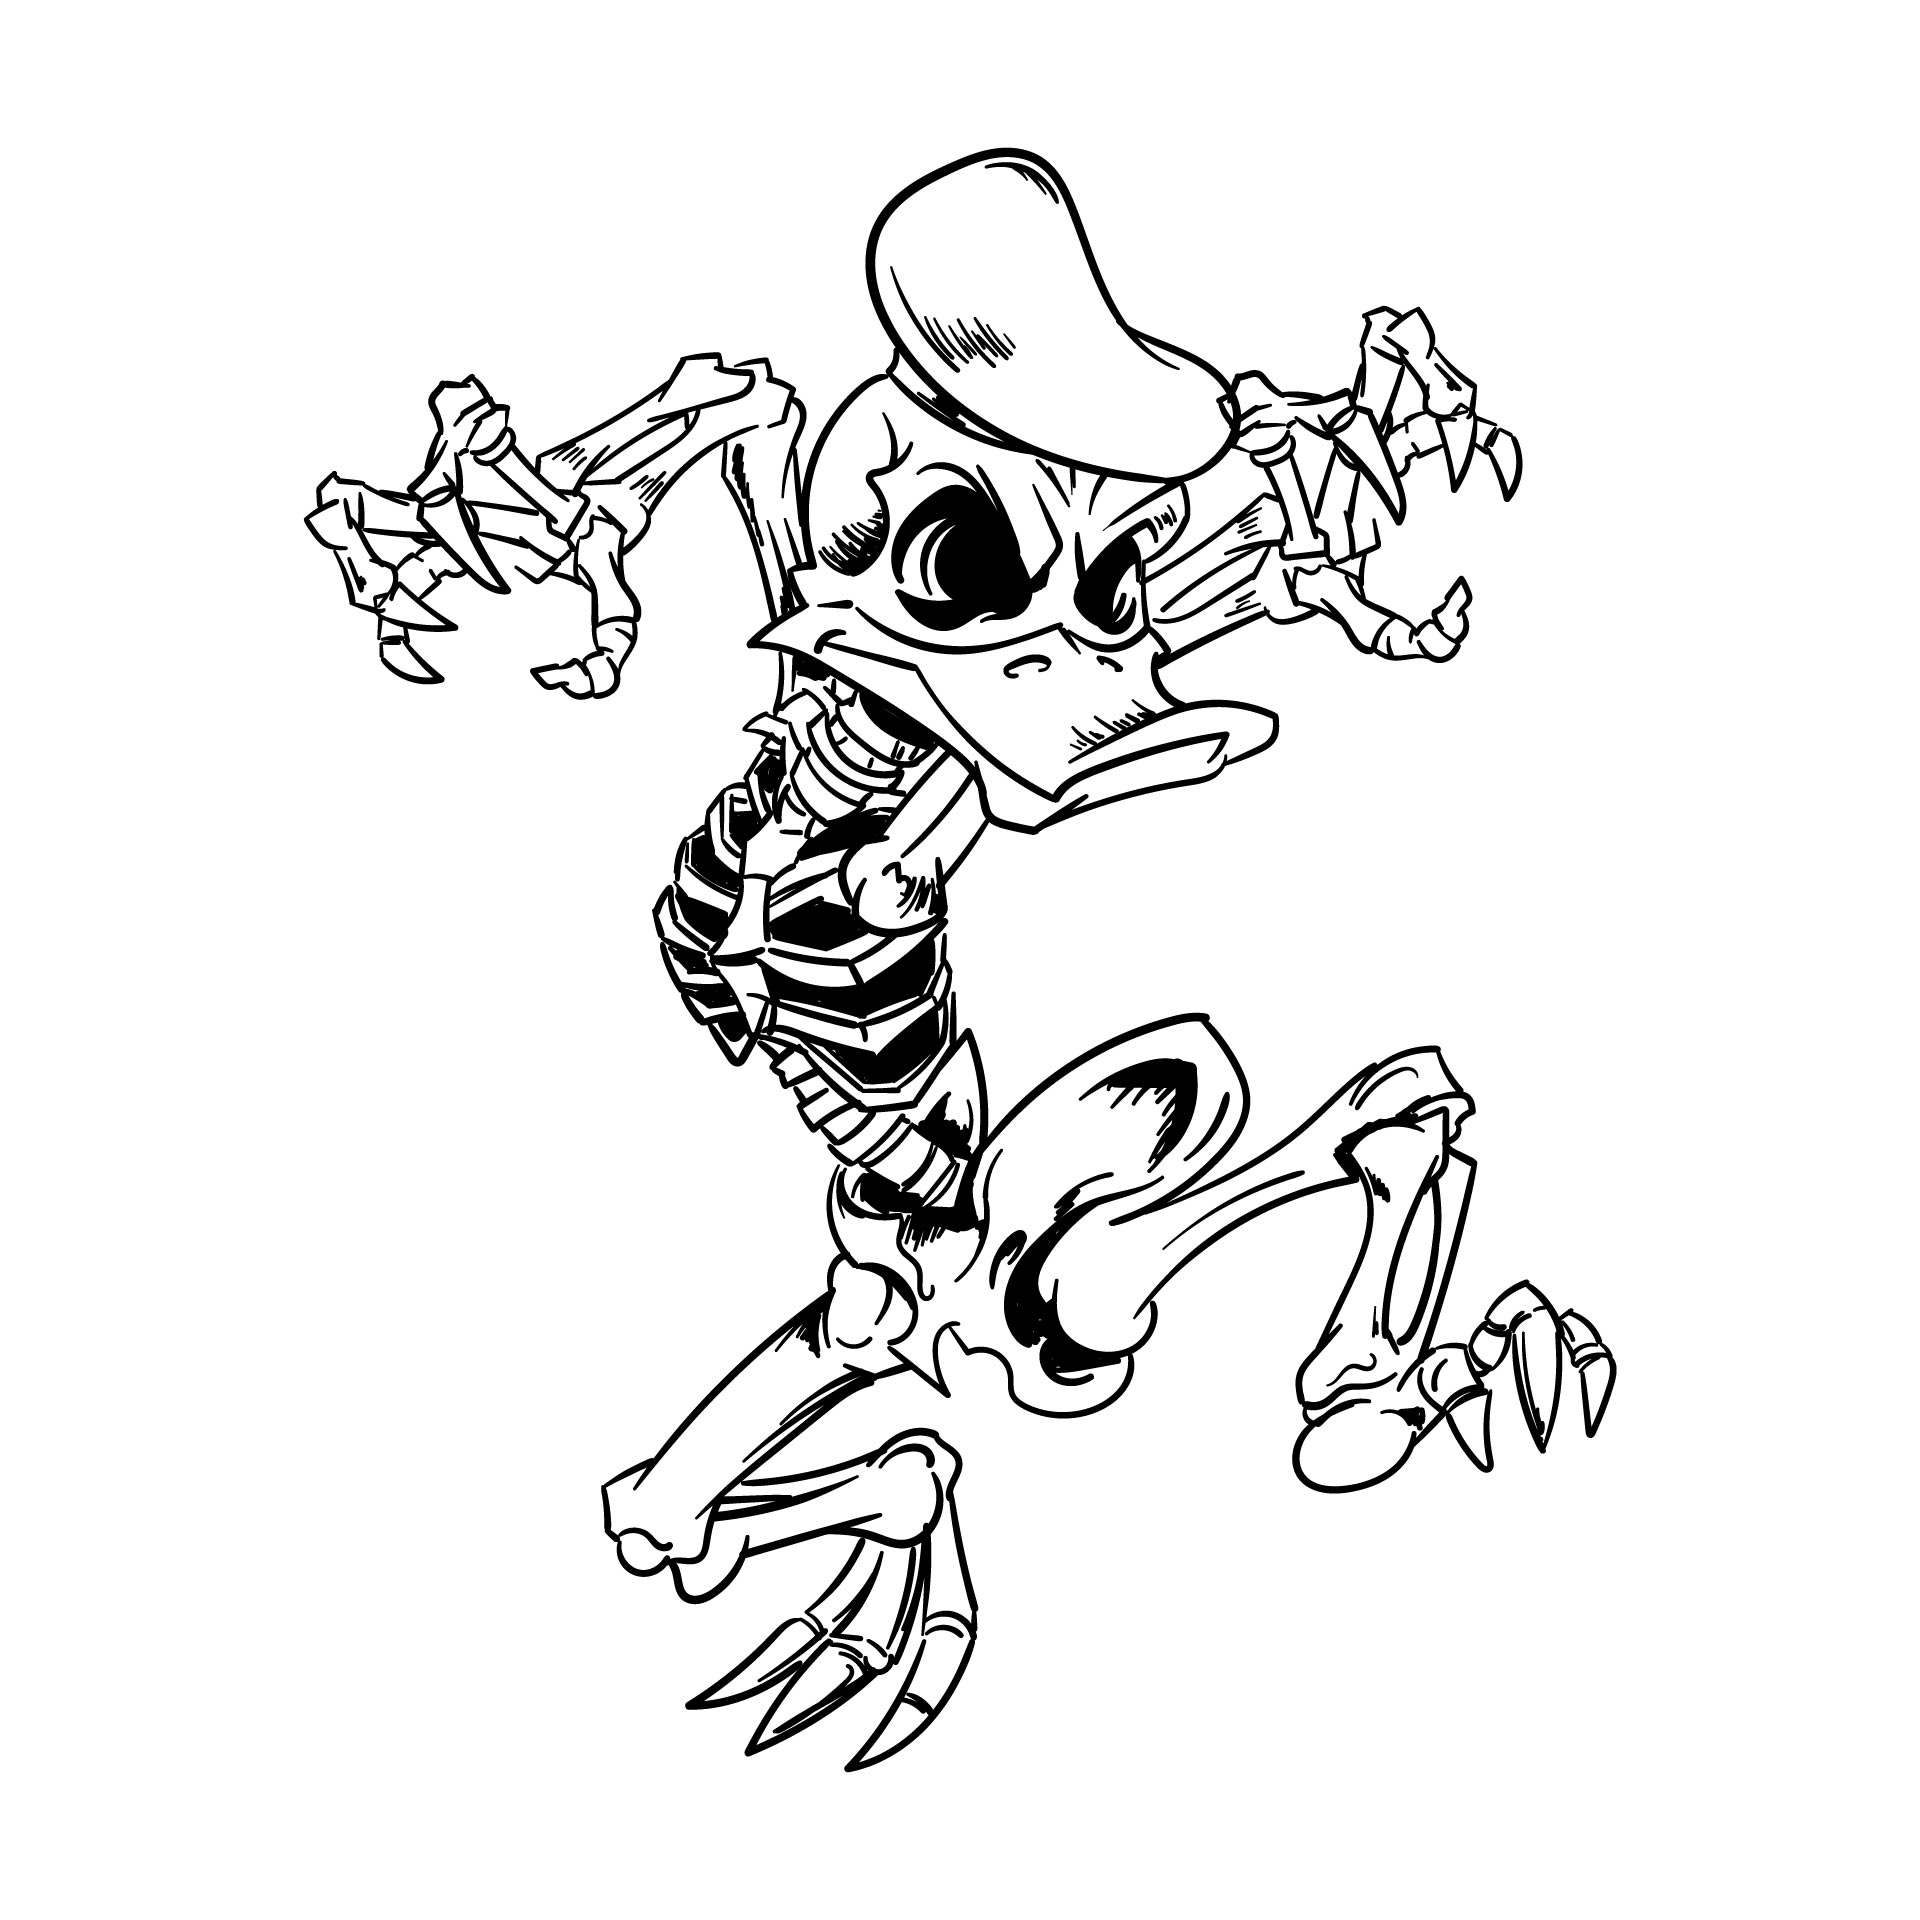 15 Best Halloween Skeleton Coloring Pages Printables PDF For Free At